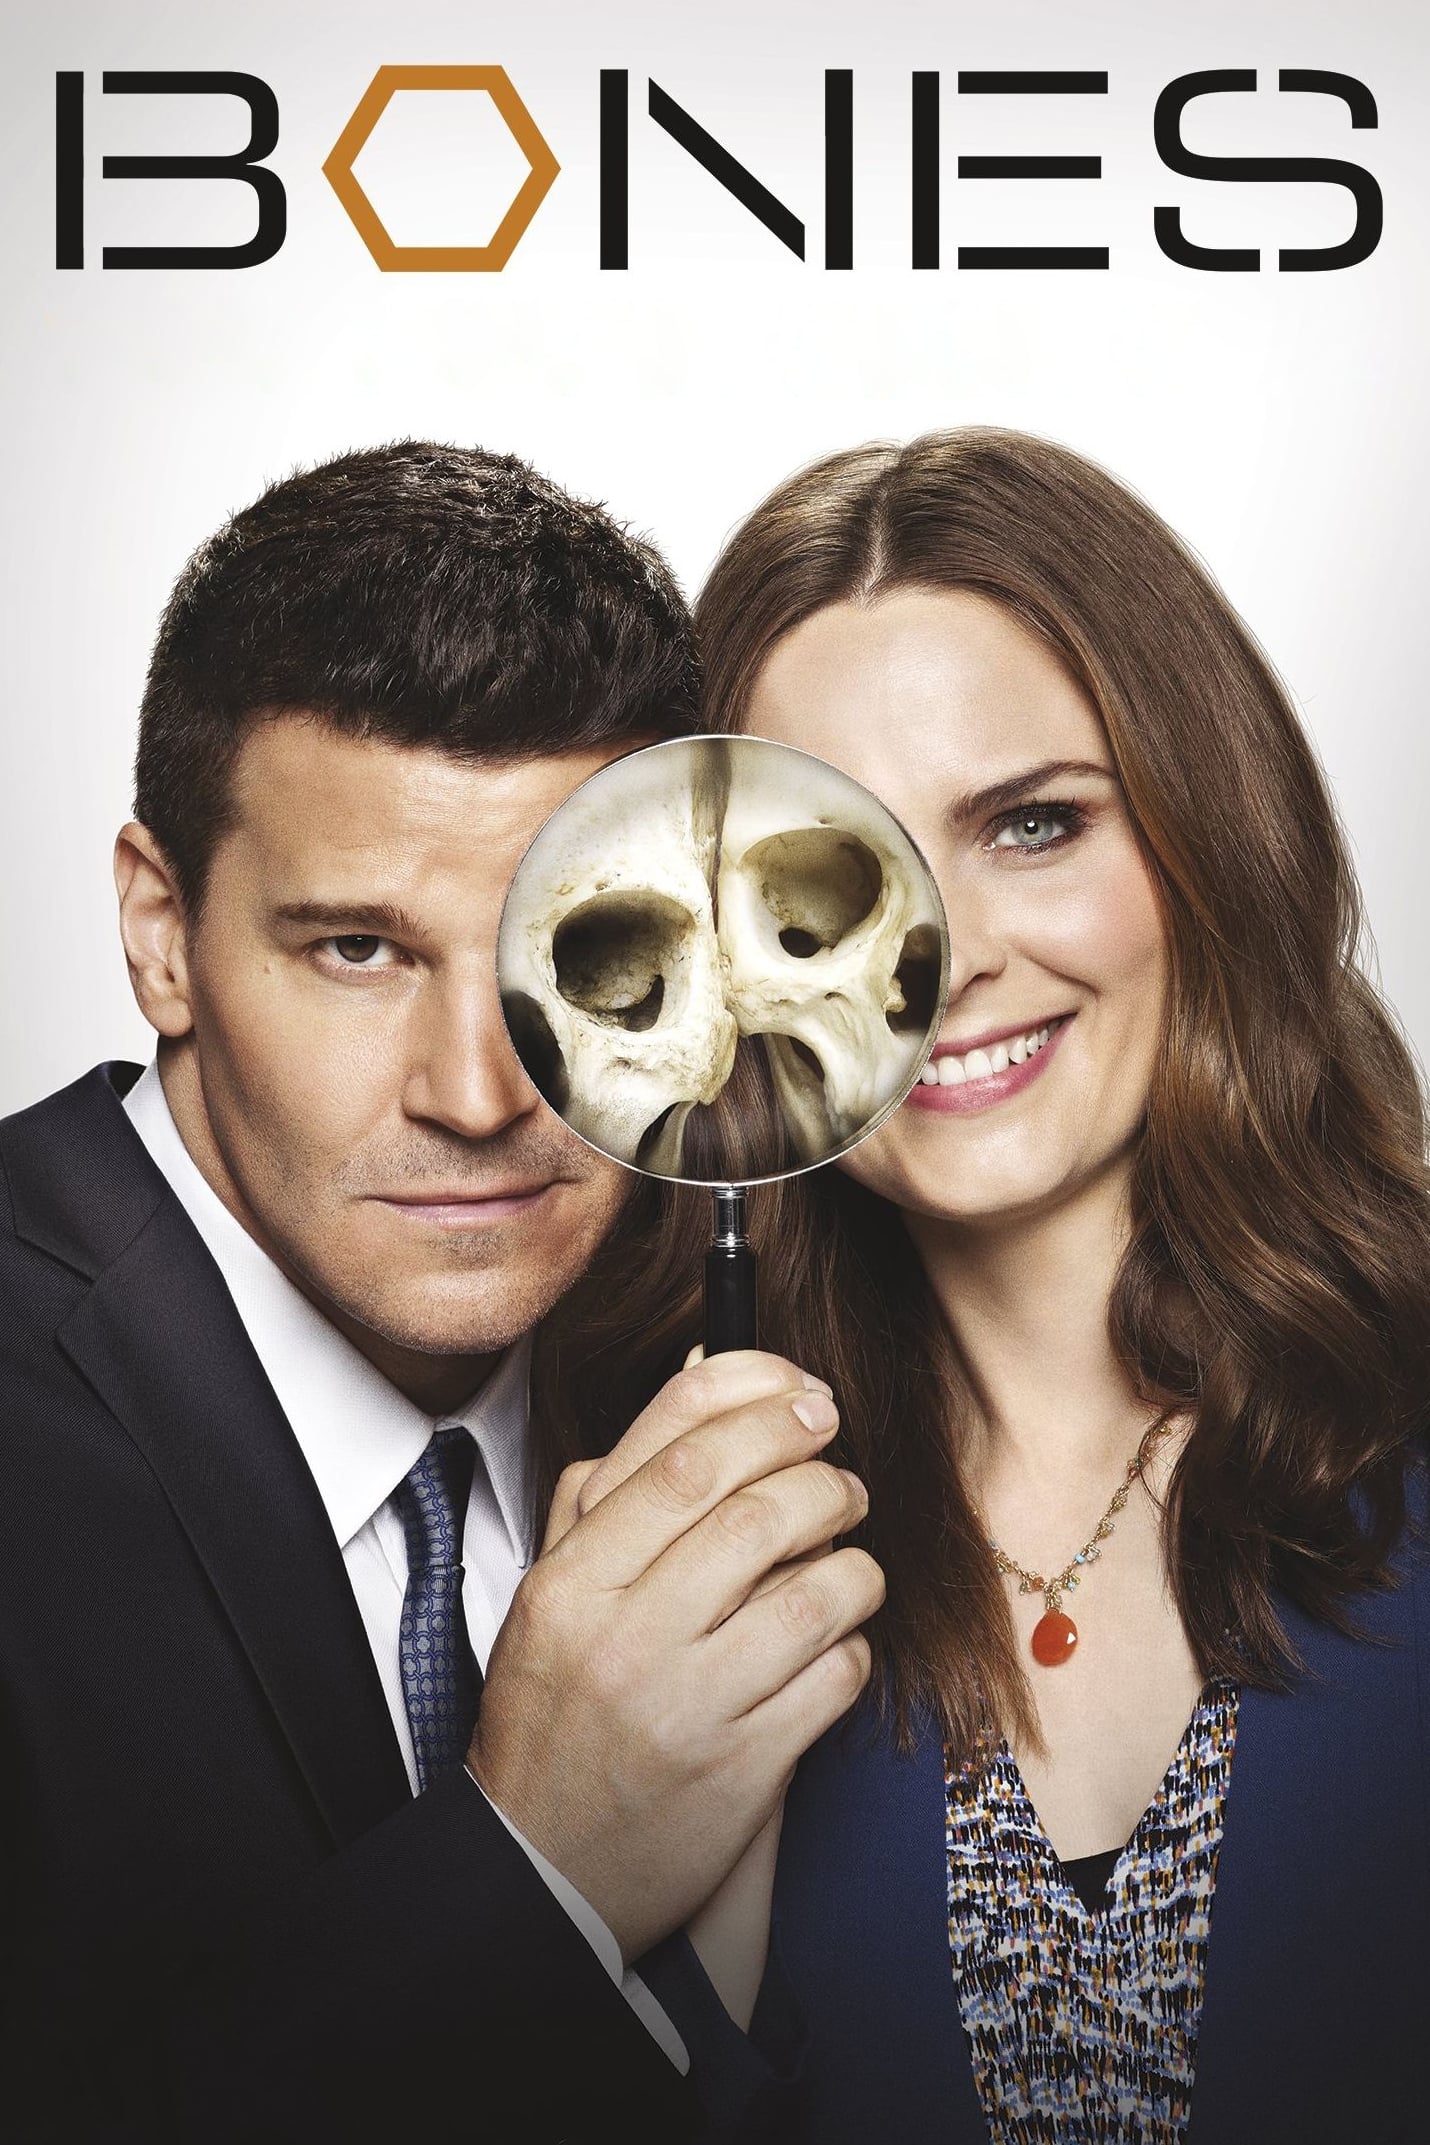 Bones TV Shows About Forensic